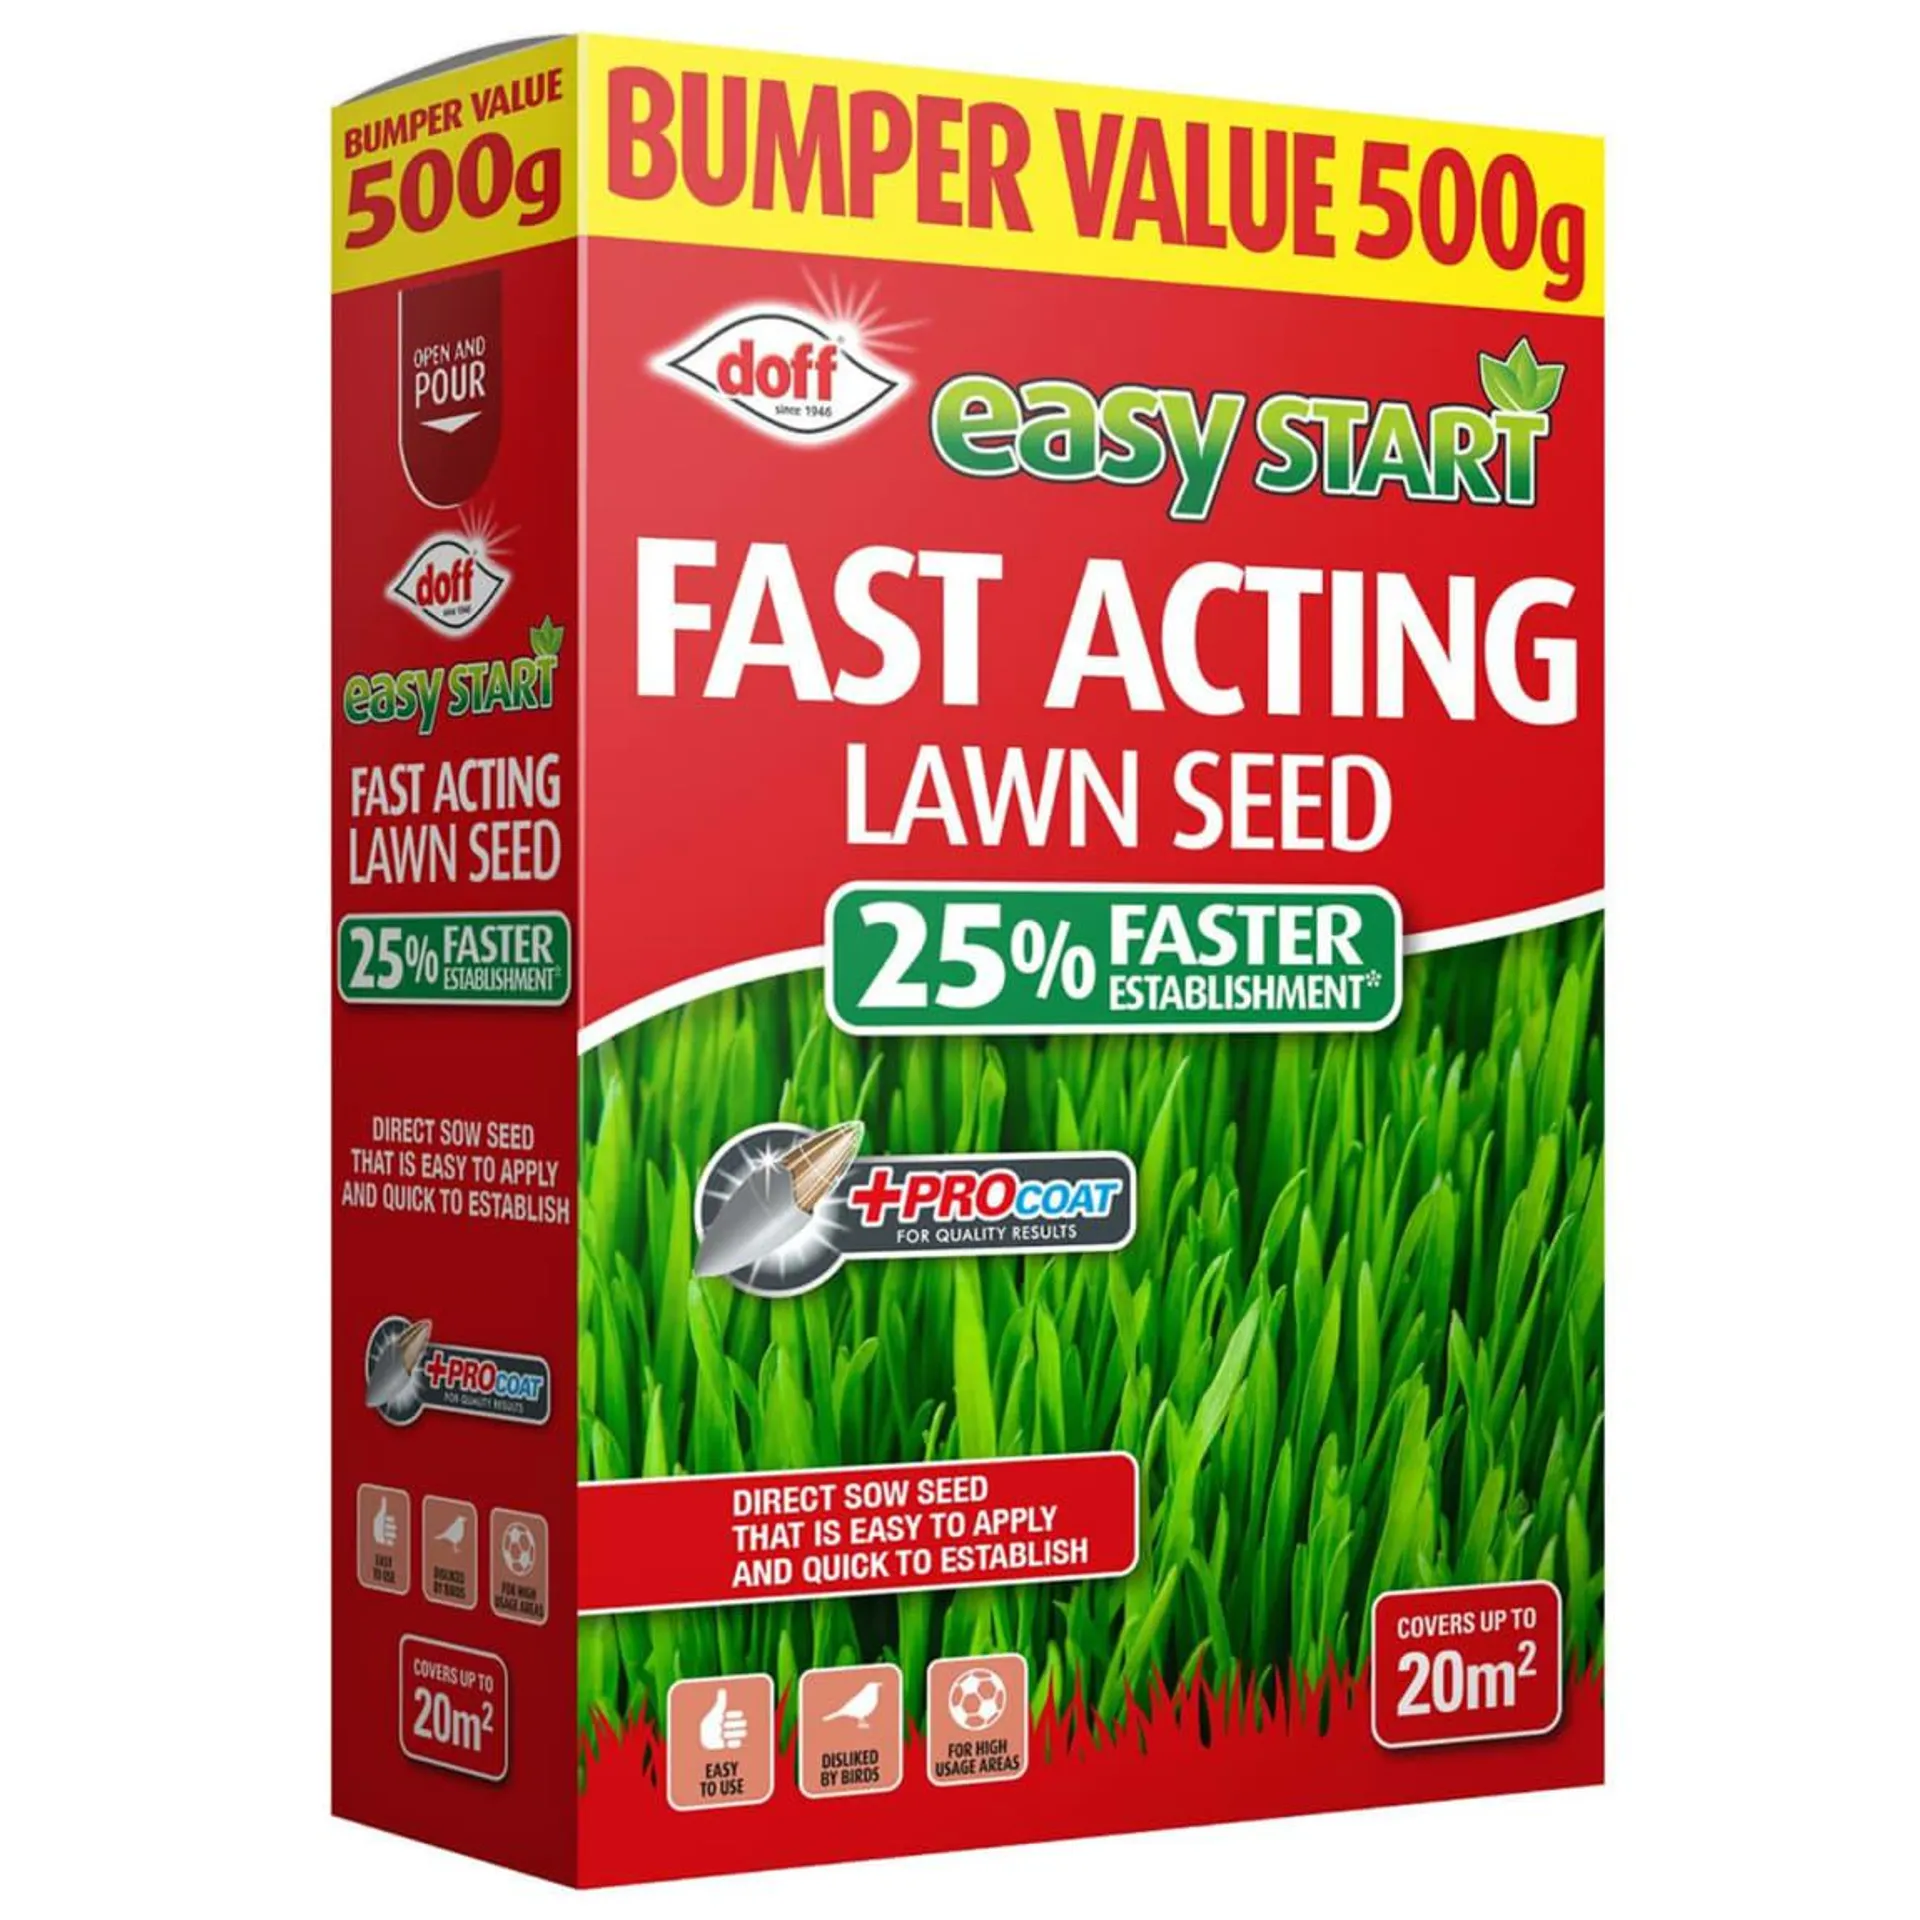 Doff Easy Start Fast Acting Lawn Seed 500g